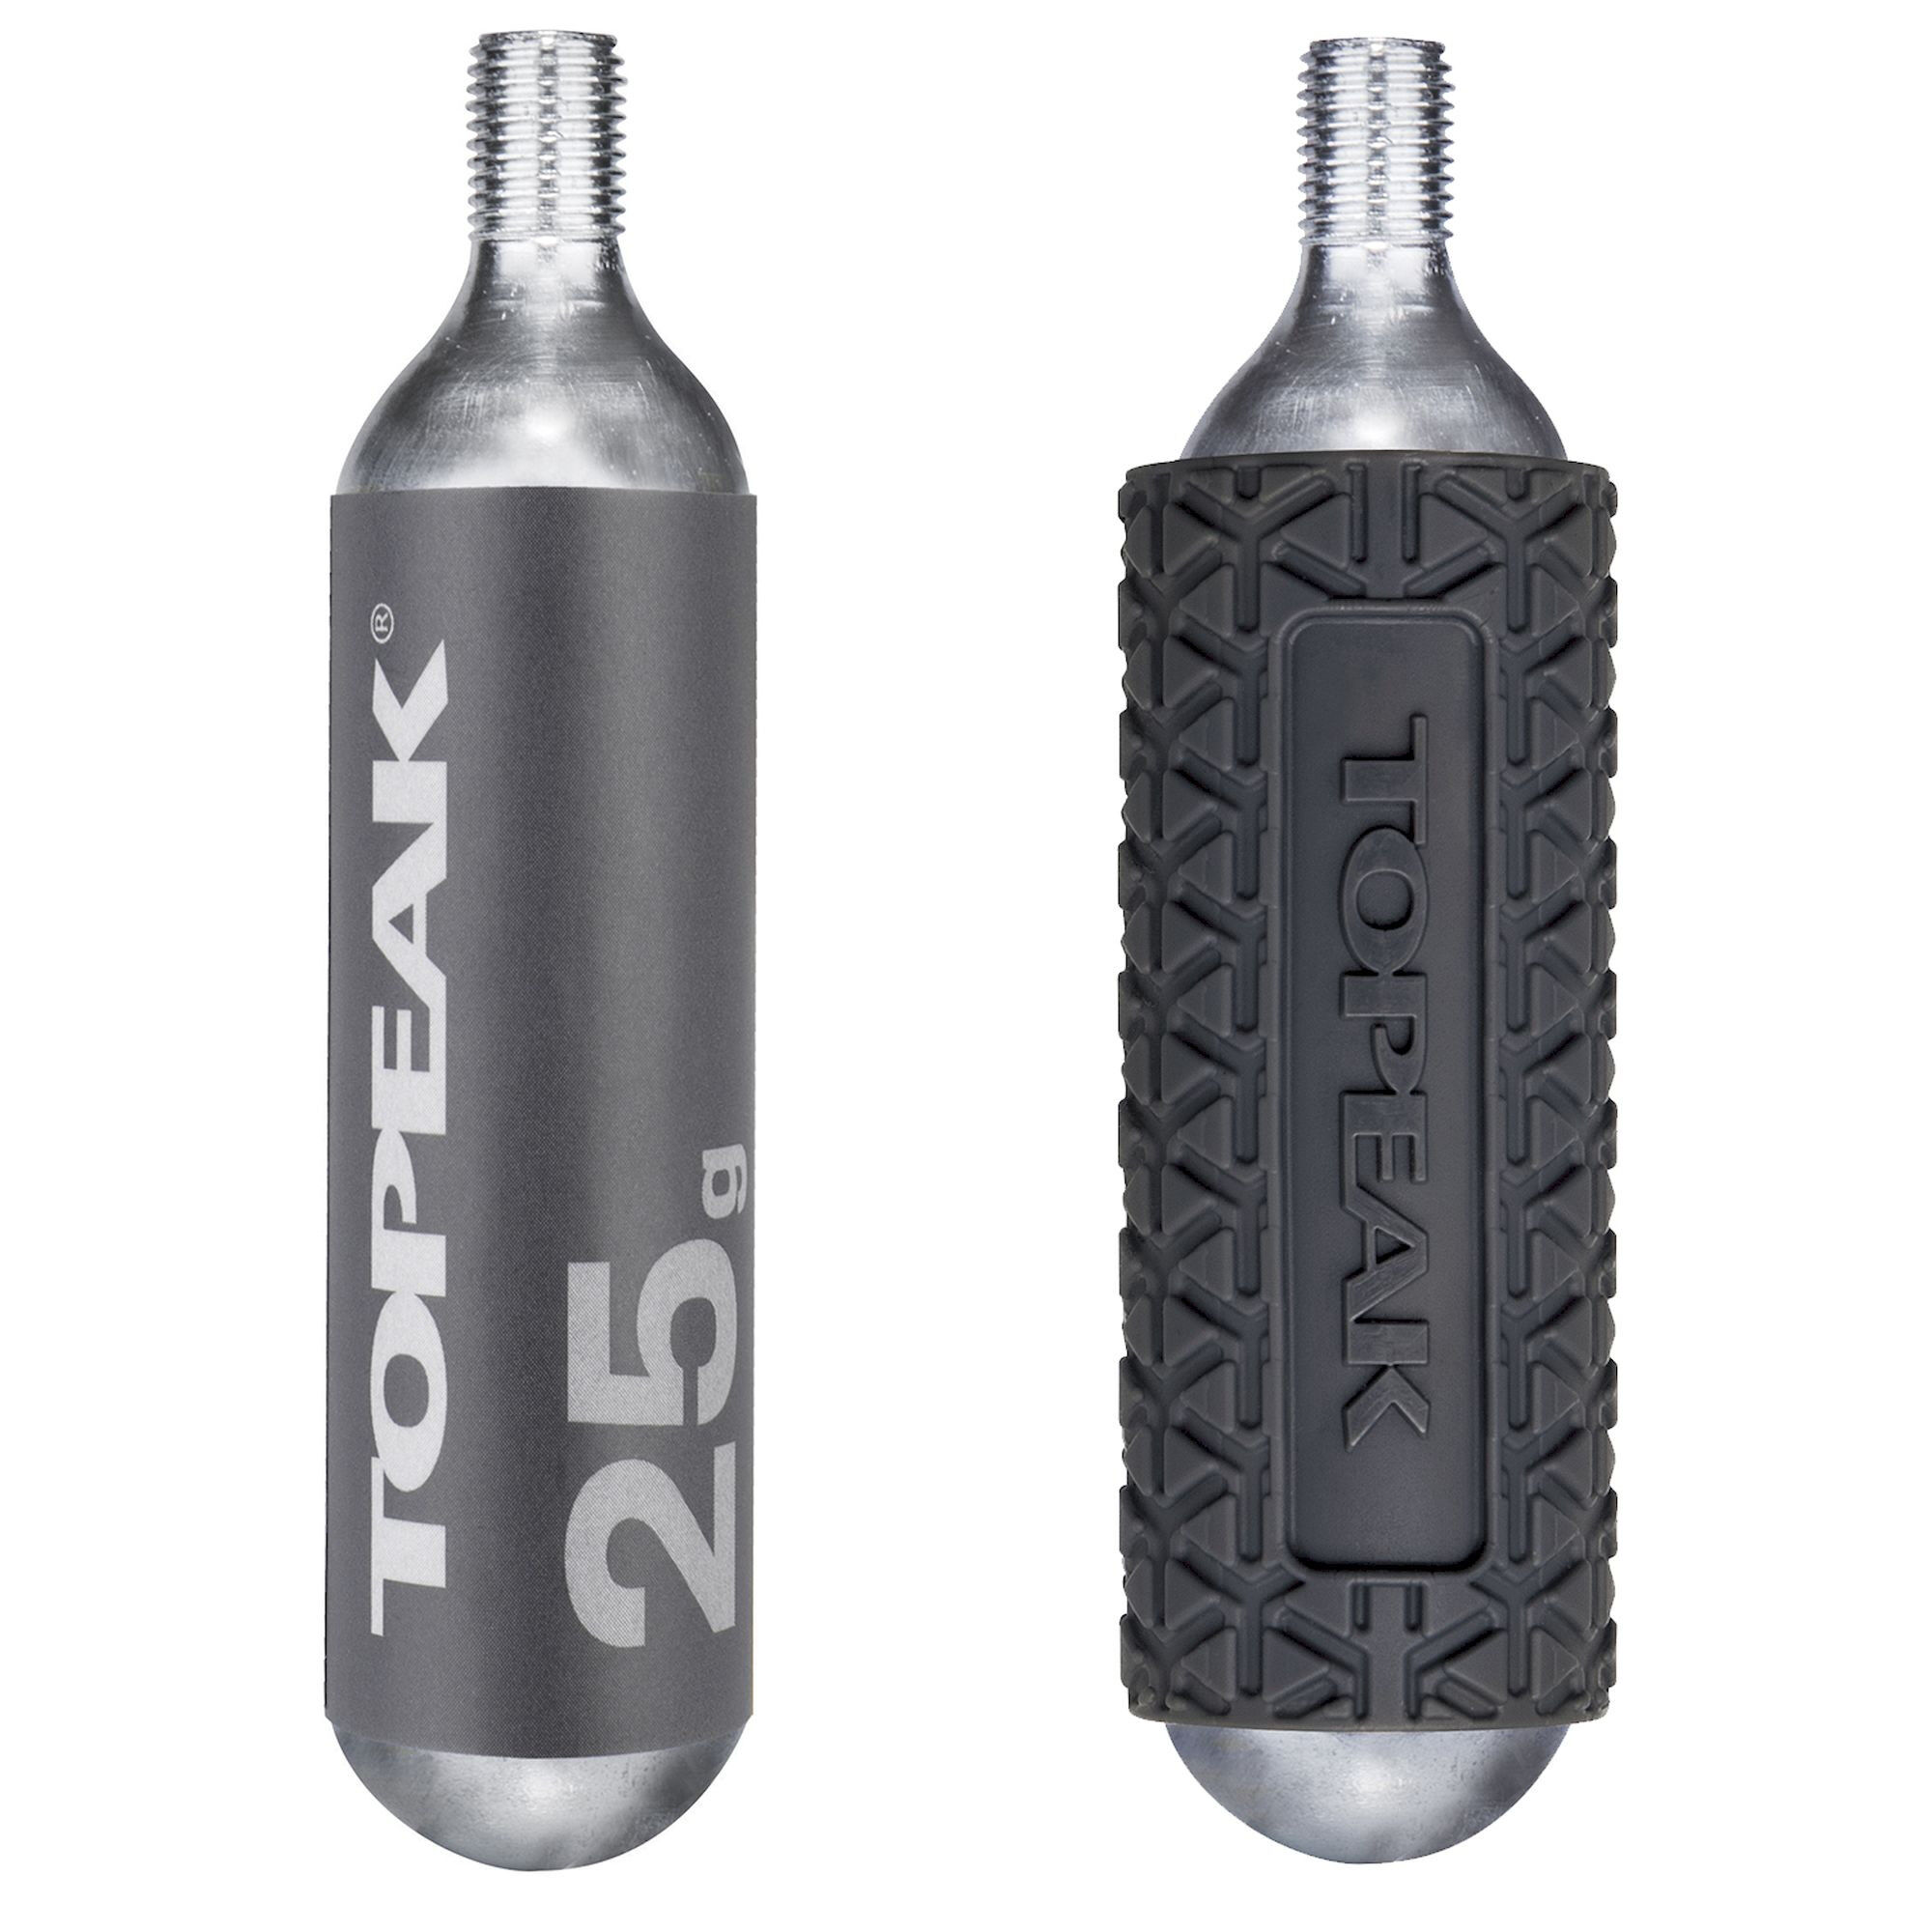 Topeak CO2 Cartridge 25g Threated (2 pieces w/ 1 cover) - CO2-Pumpe | Hardloop